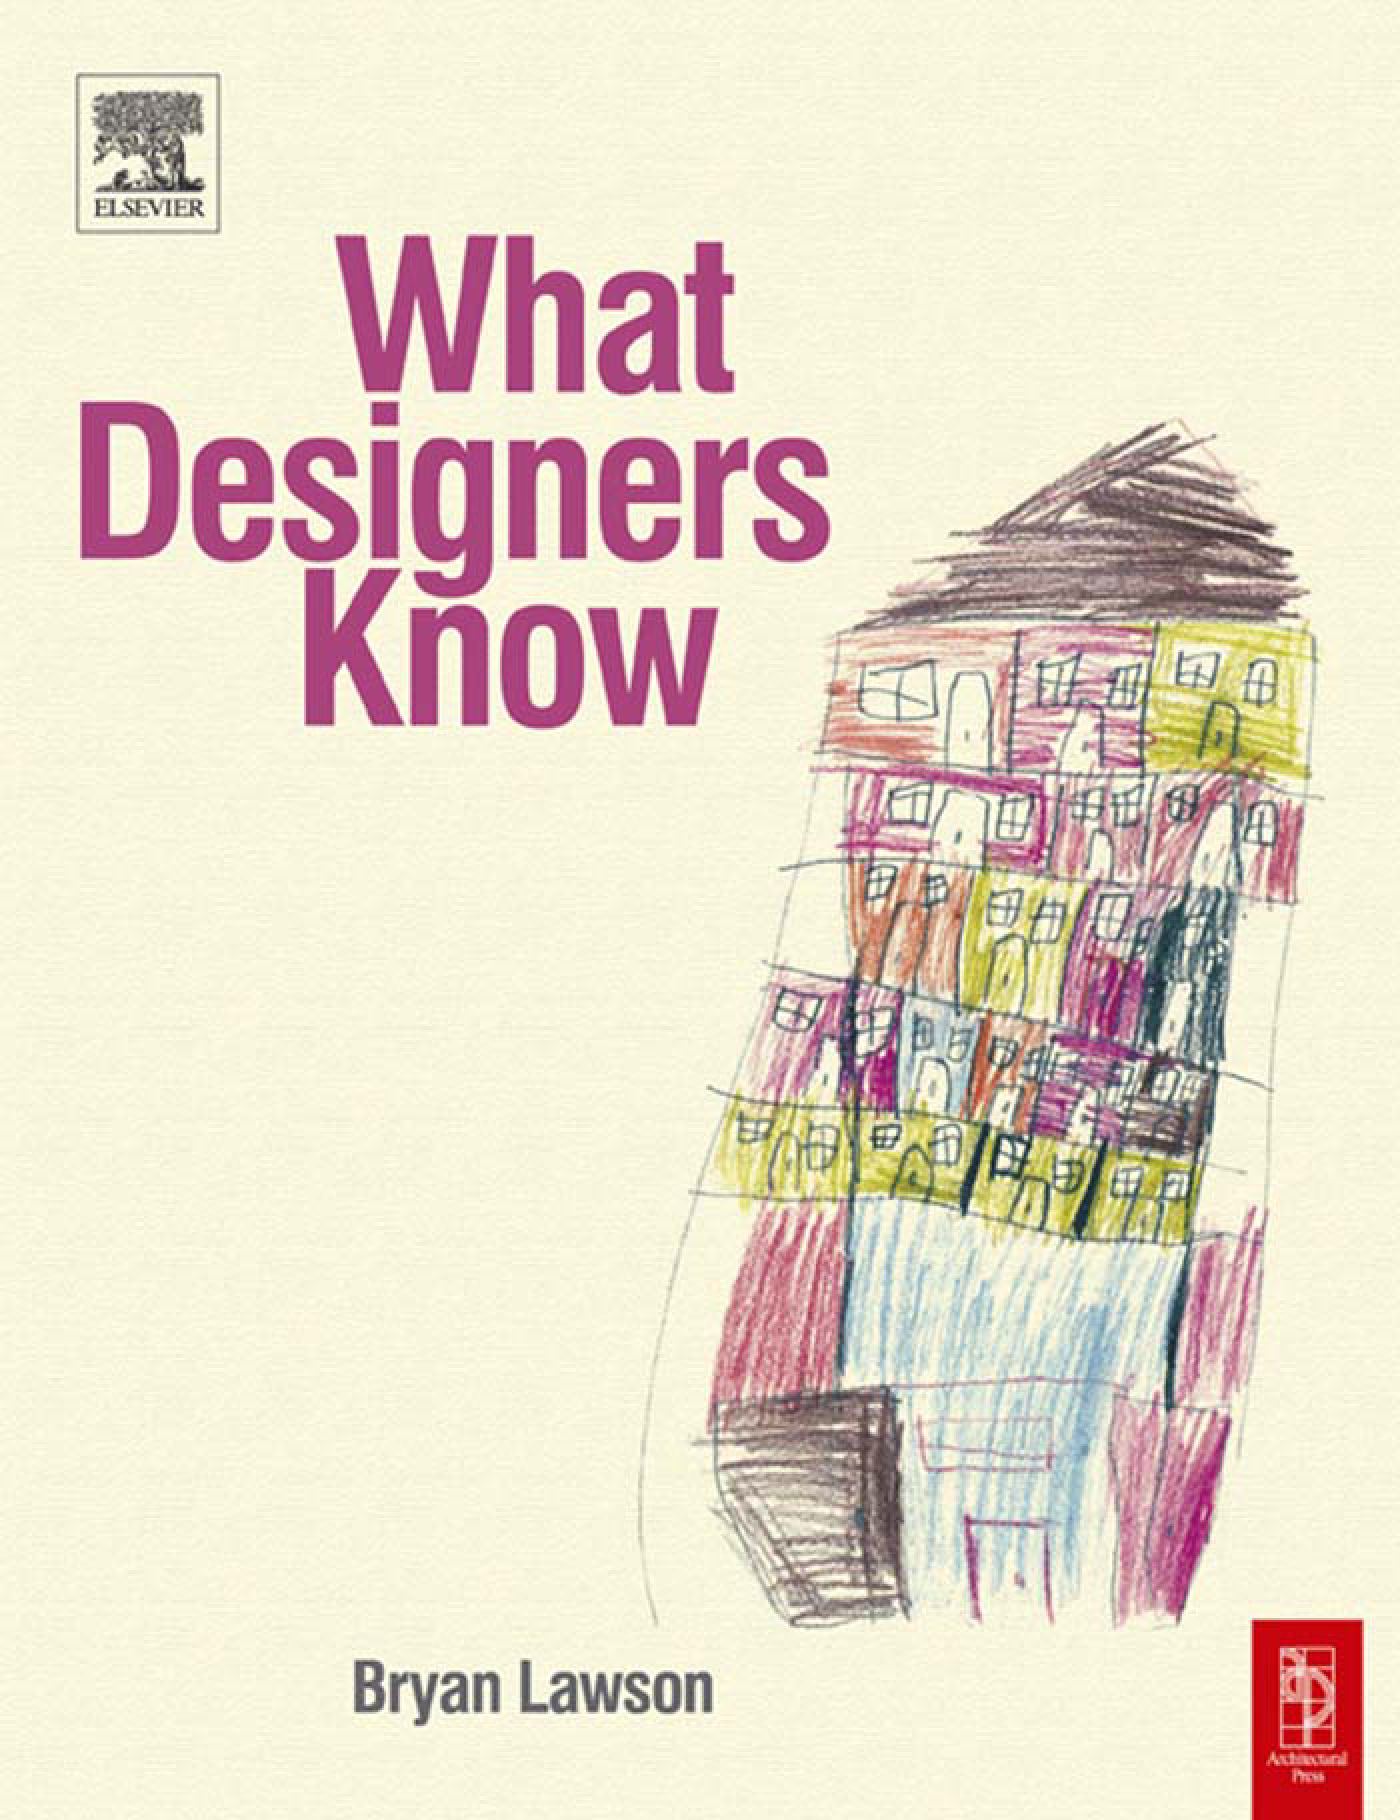 What designers know